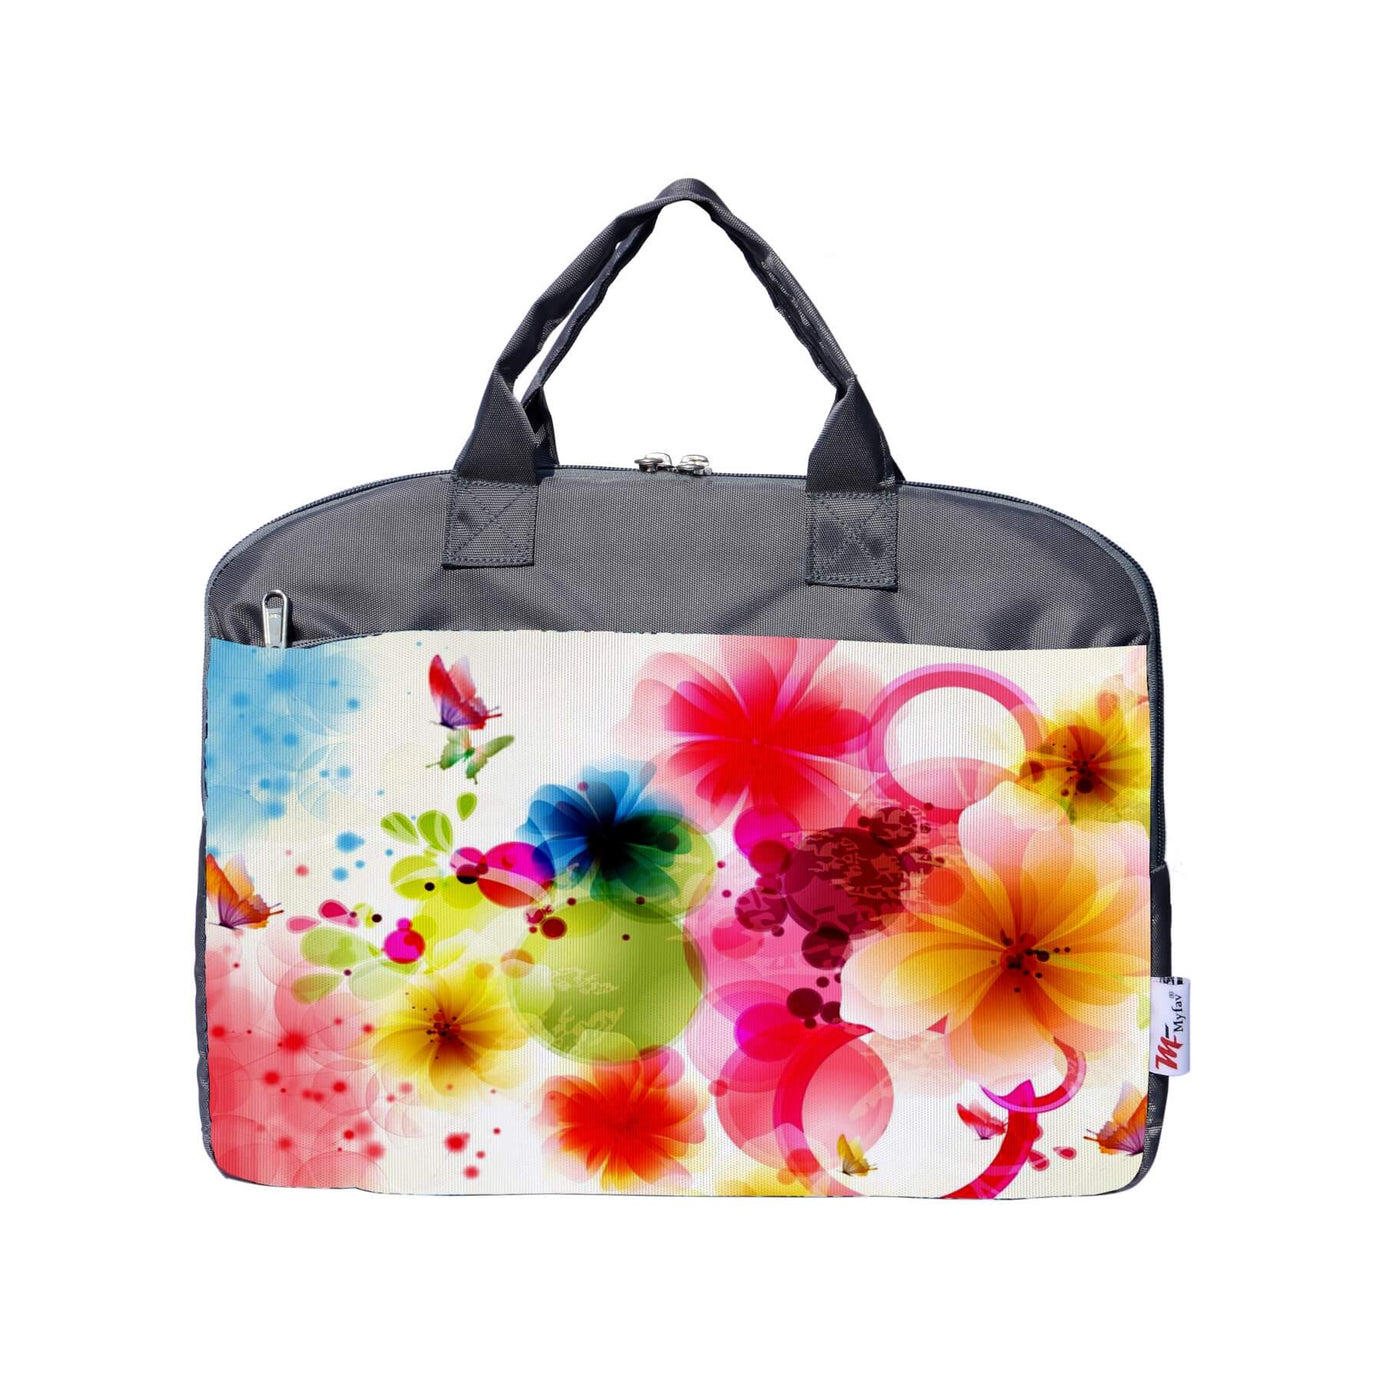 My Fav Bright Floral Print Office Laptop Bag Briefcase 15.6 Inch for Women and Men